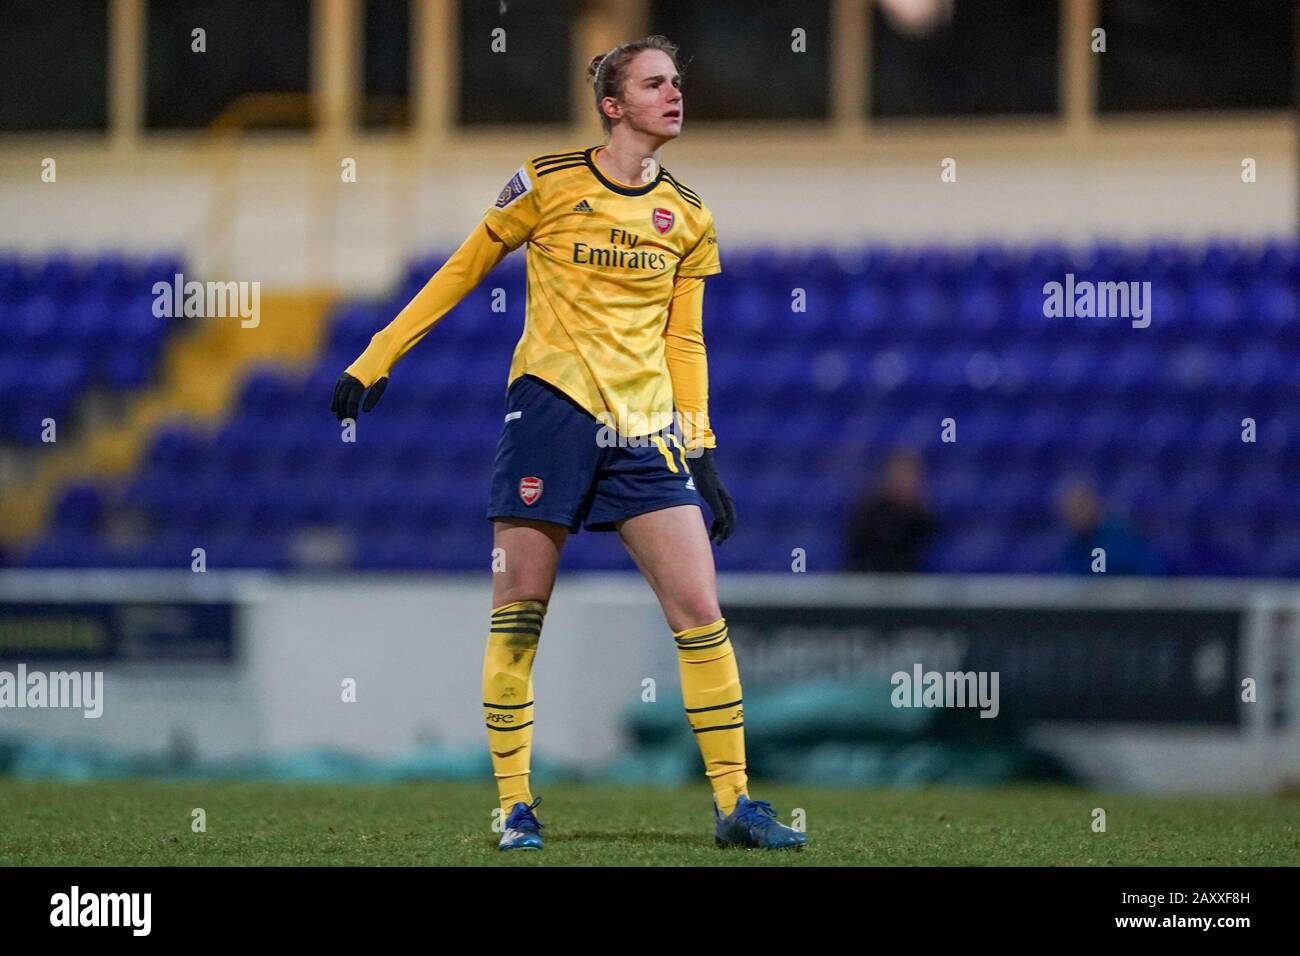 CHESTER. ENGLAND. FEB 13th: Vivianne Miedema of Arsenal after a missed chance  during the Women’s Super League game between Liverpool Women and Arsenal Women at The Deva Stadium in Chester, England. (Photo by Daniela Porcelli/SPP) Stock Photo